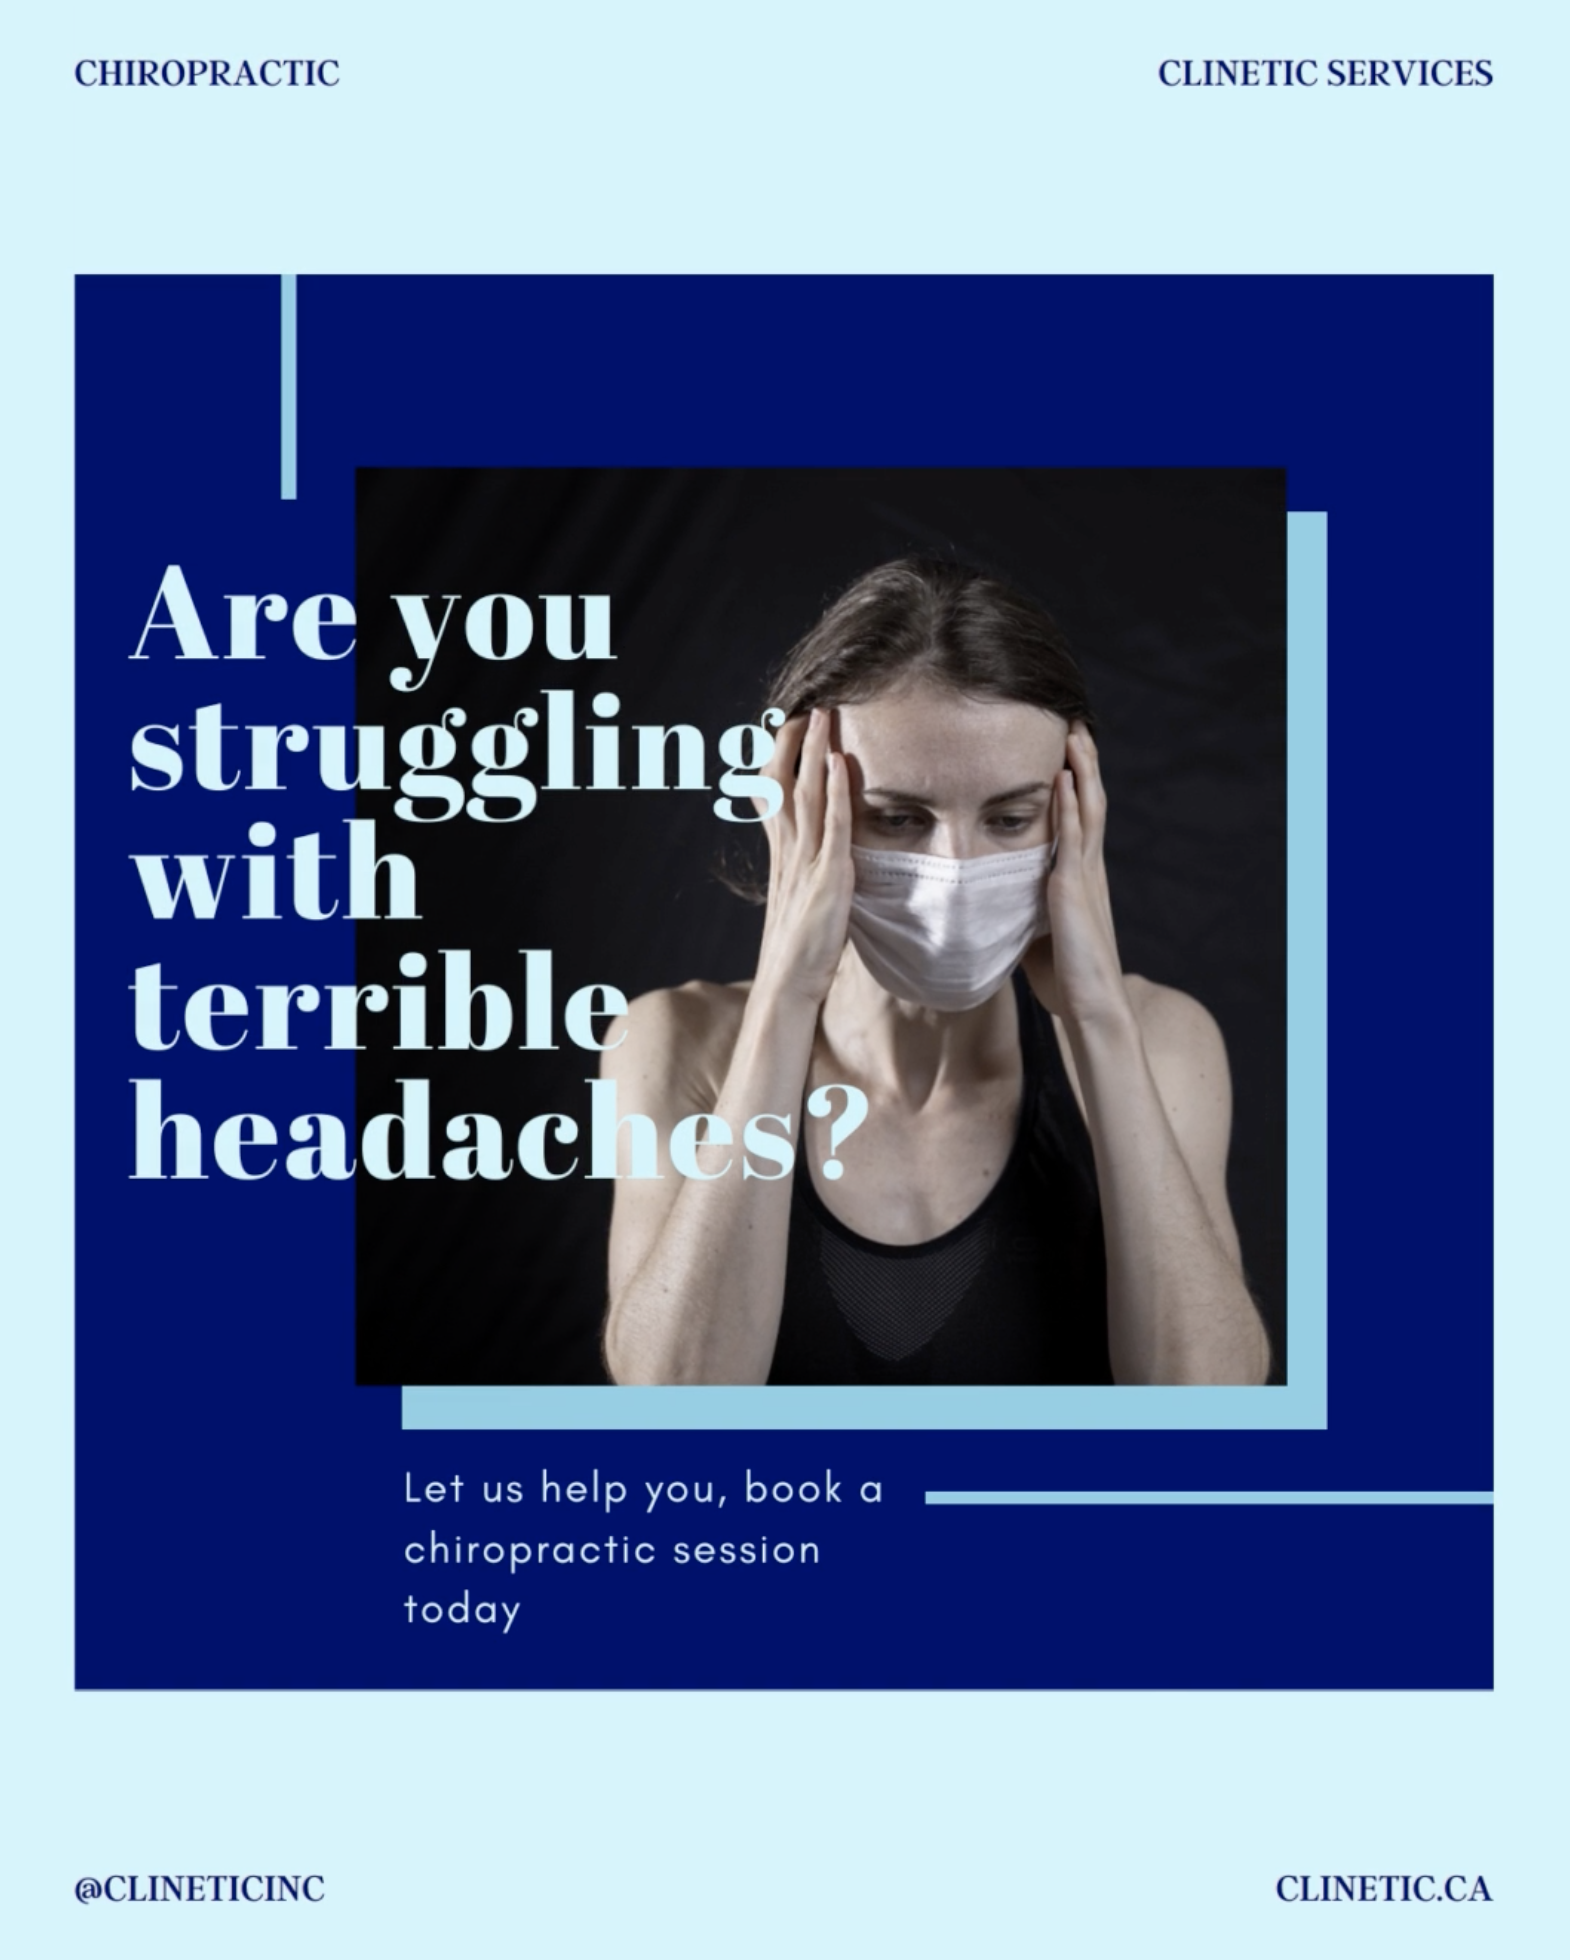 Are you struggling with terrible headaches?